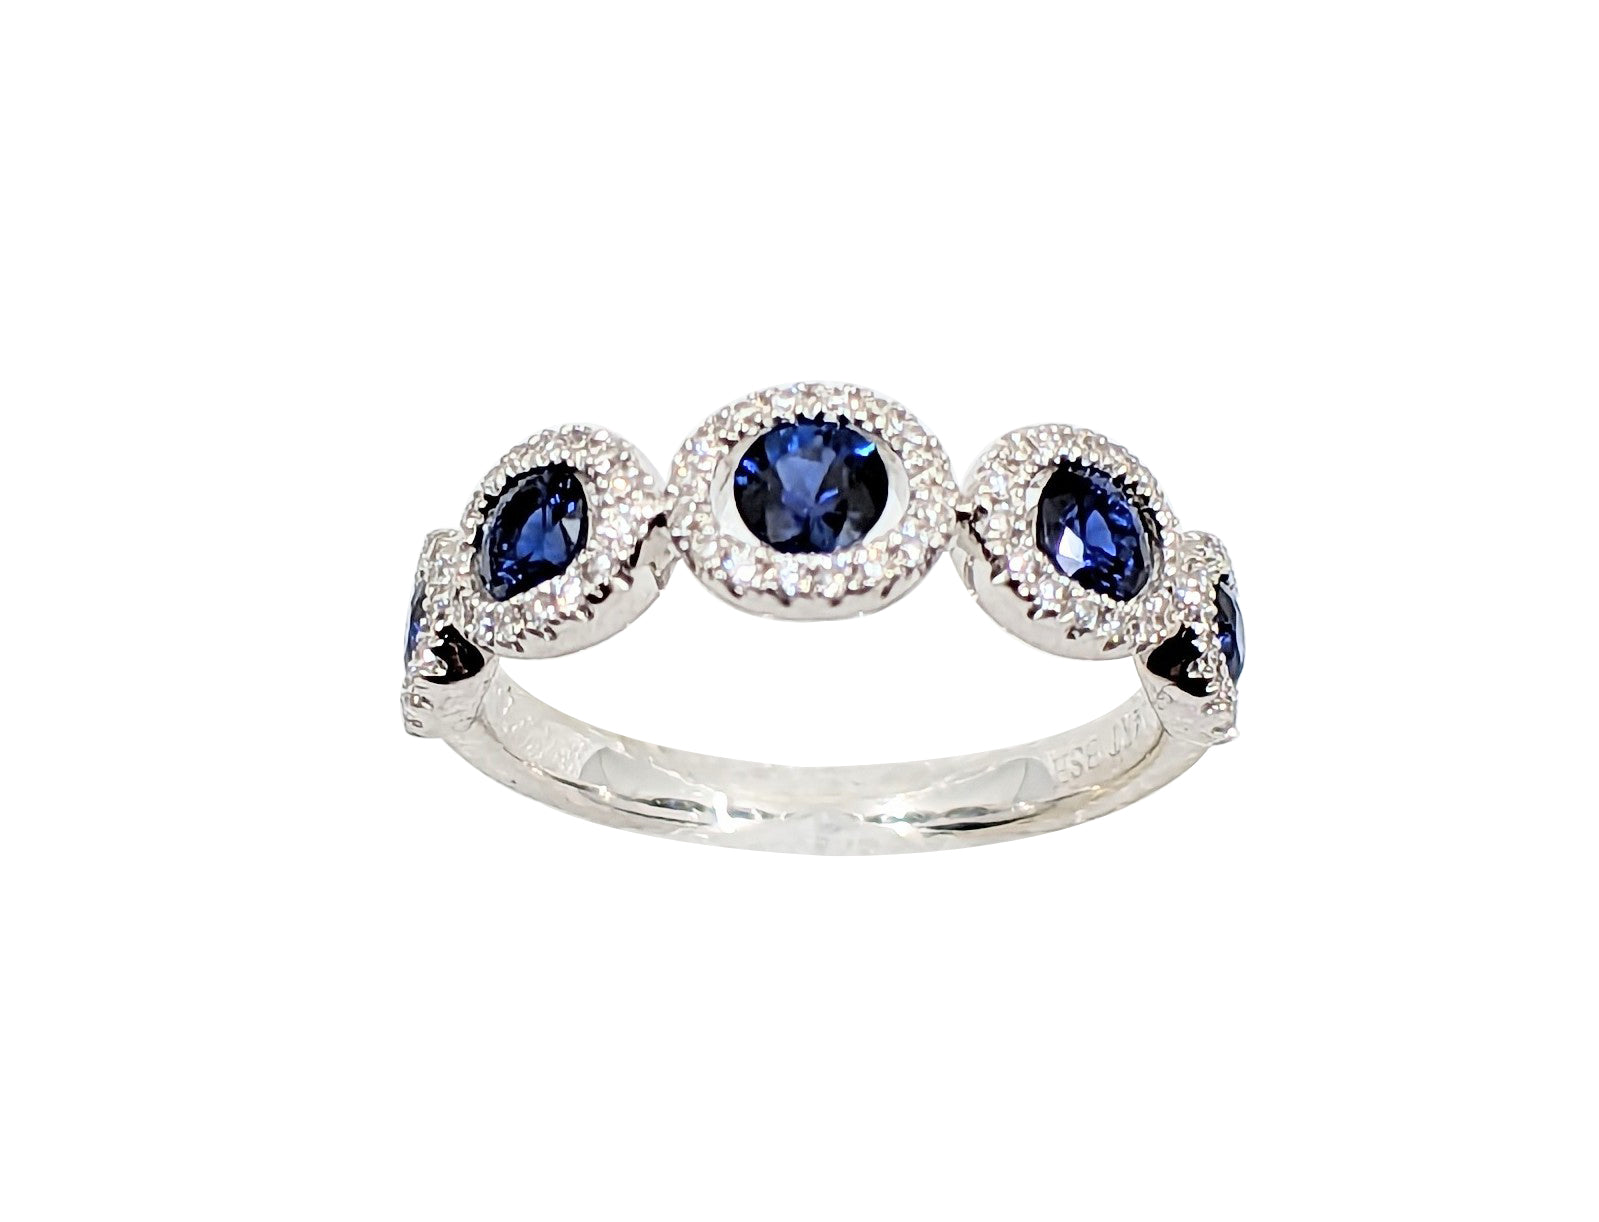 14kt White Gold Diamond and Sapphire Eternity Ring